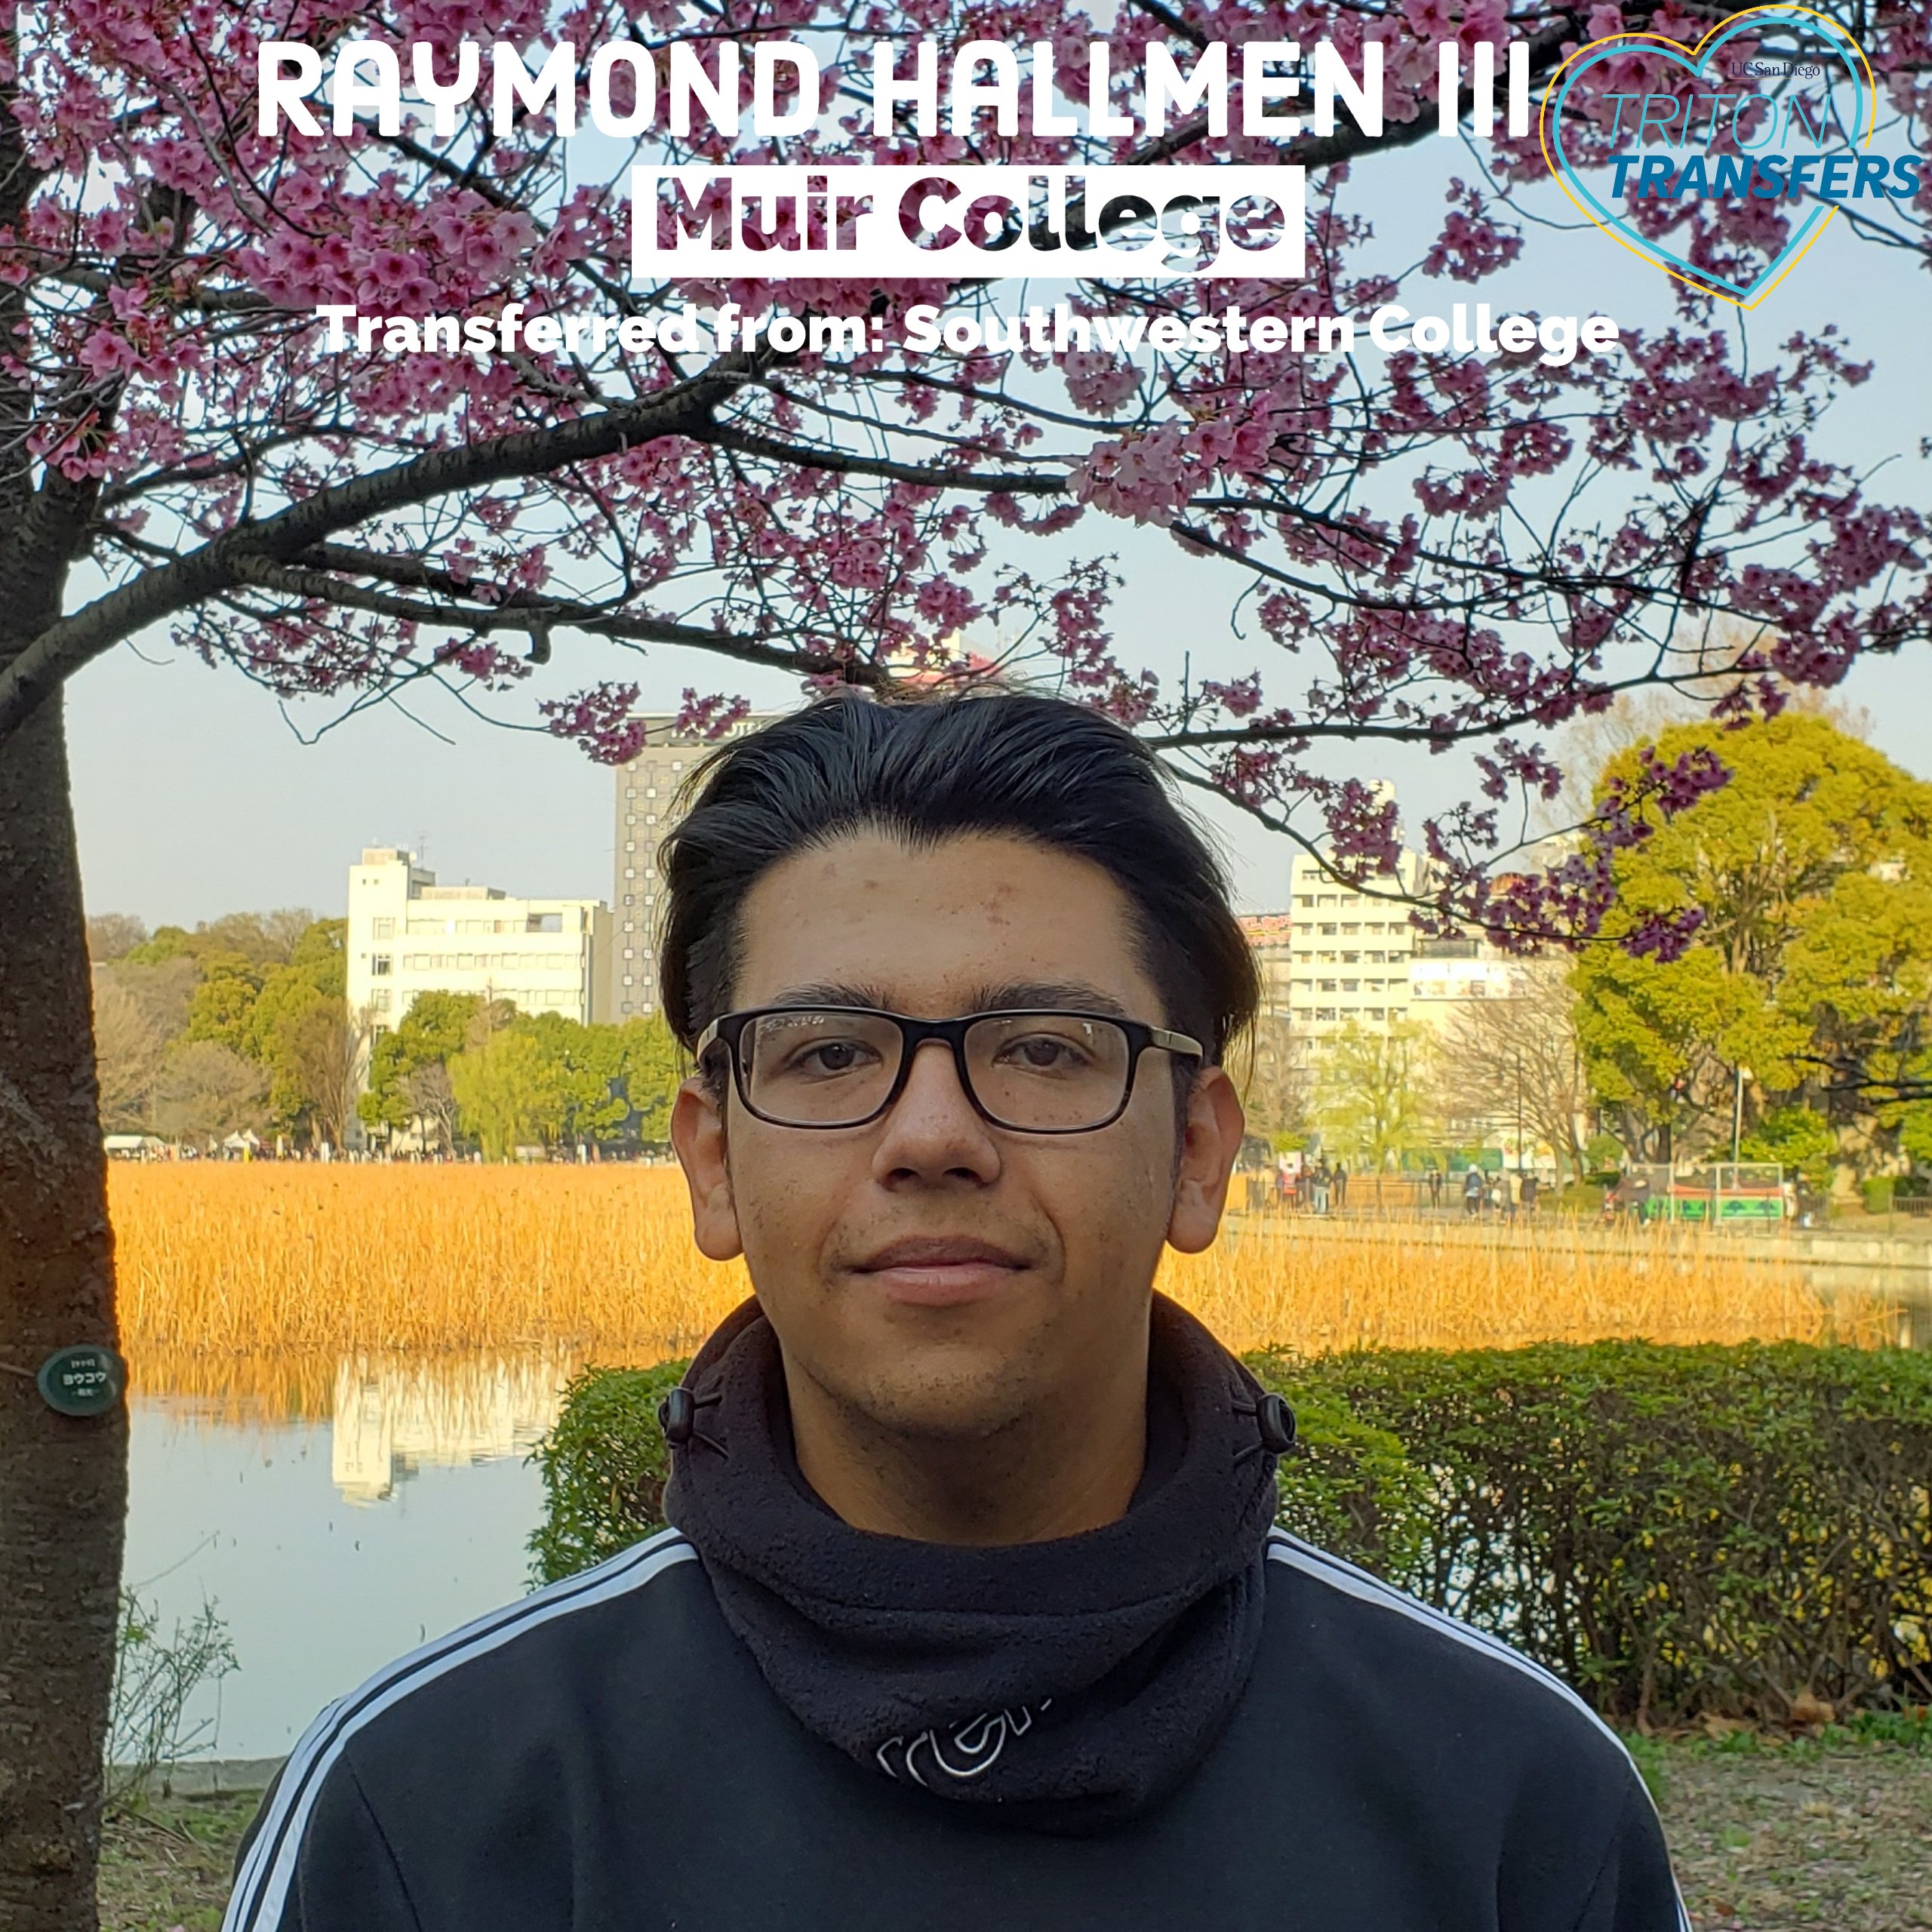 Raymond Hallmen III Email: Rwhallmen@gmail.com Muir College Transferred from: Southwestern College Major: Cognitive and Behavioral Neuroscience Minor: General Biology Involvement: UC San Diego Recreation, Muir Peer Mentor, Intramural Basketball, Research in Cognitive Science Department - studied attention using EEG Future Plans: Gap year before Pharmacy School! Advice: Have fun! Your experience is what you make of it. Once I got involved with work and other programs at UCSD, I felt part of the campus culture and I thoroughly enjoyed my time here. I wish I had gotten involved sooner!